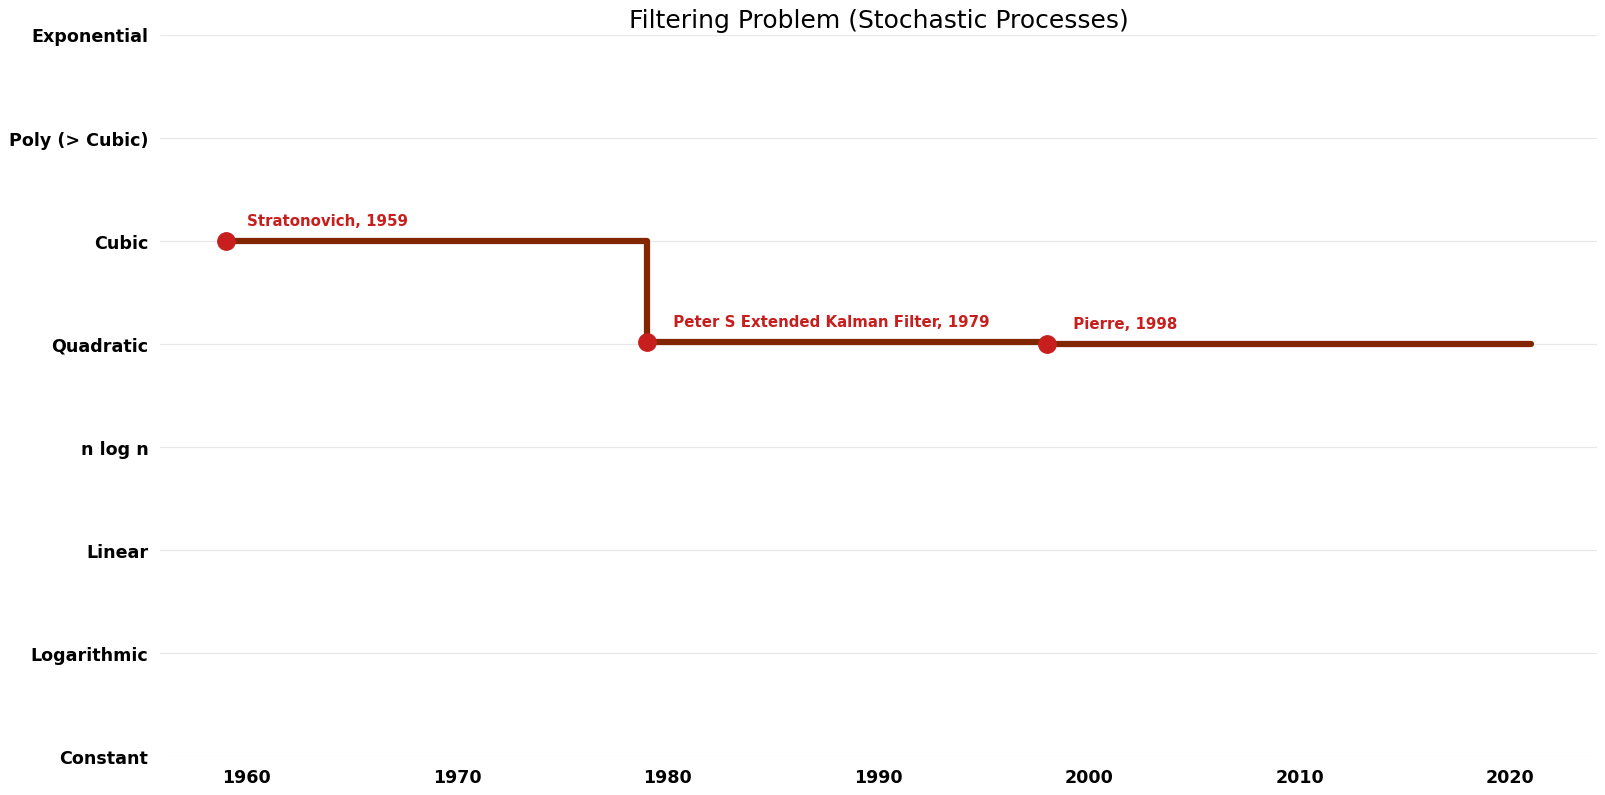 Filtering Problem (Stochastic Processes) - Time.png